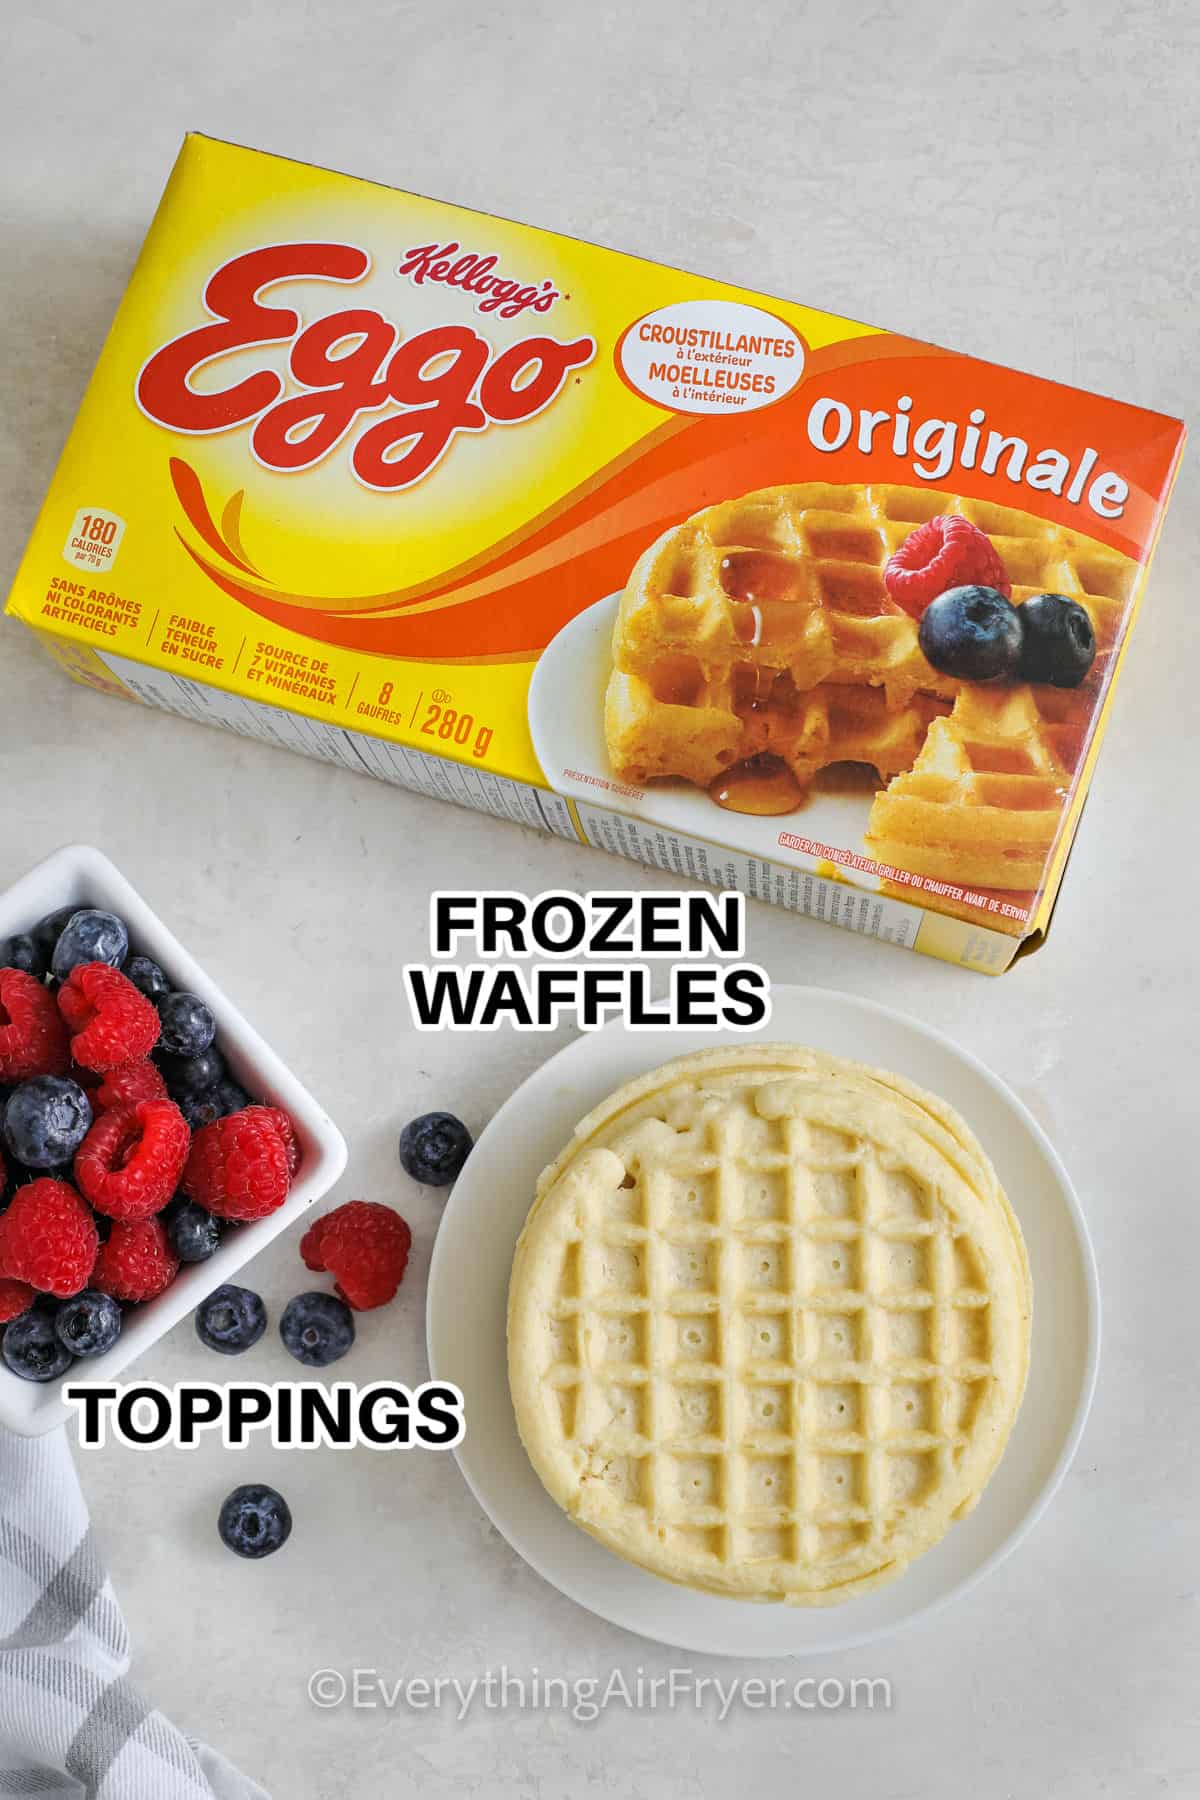 frozen waffles and berries to make Frozen Waffles in the Air Fryer